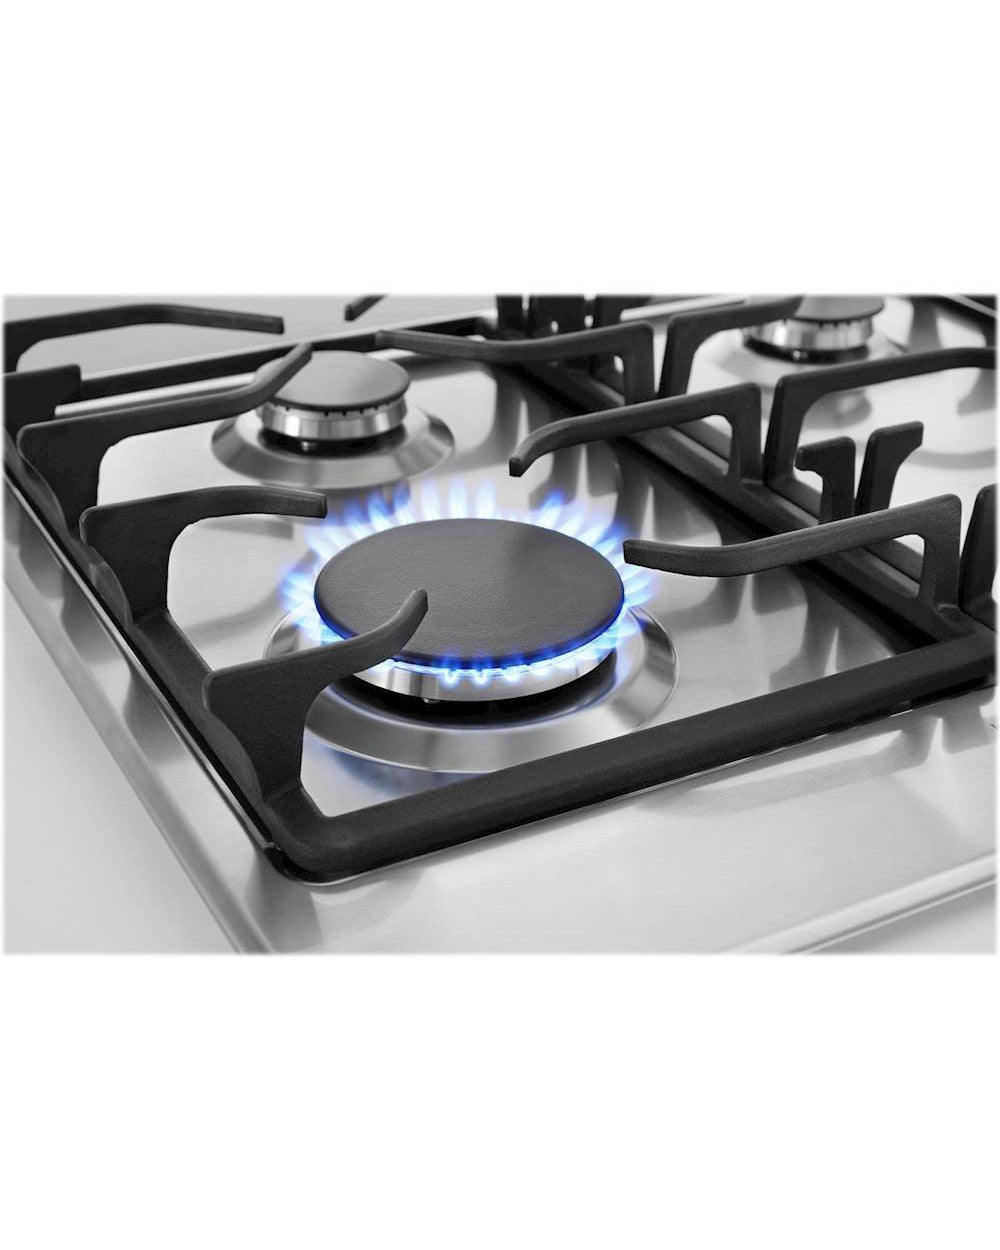 WHIRLPOOL WCG52424AS 24-inch Gas Cooktop with Sealed Burners